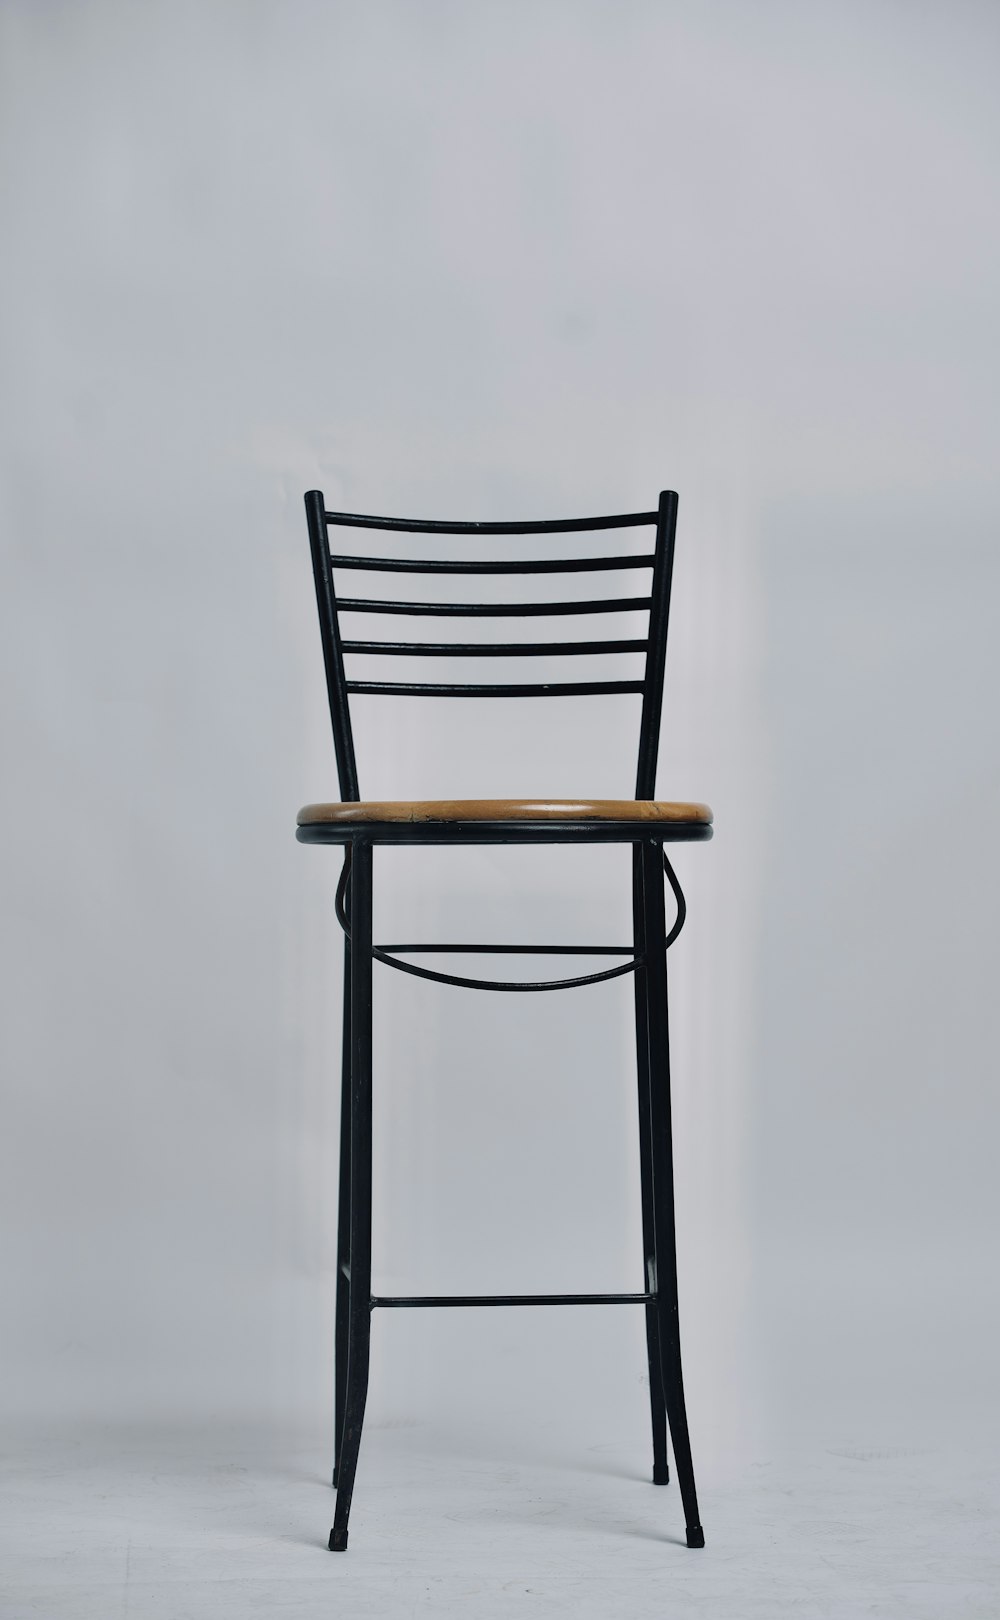 a black chair with a wooden seat on a white background